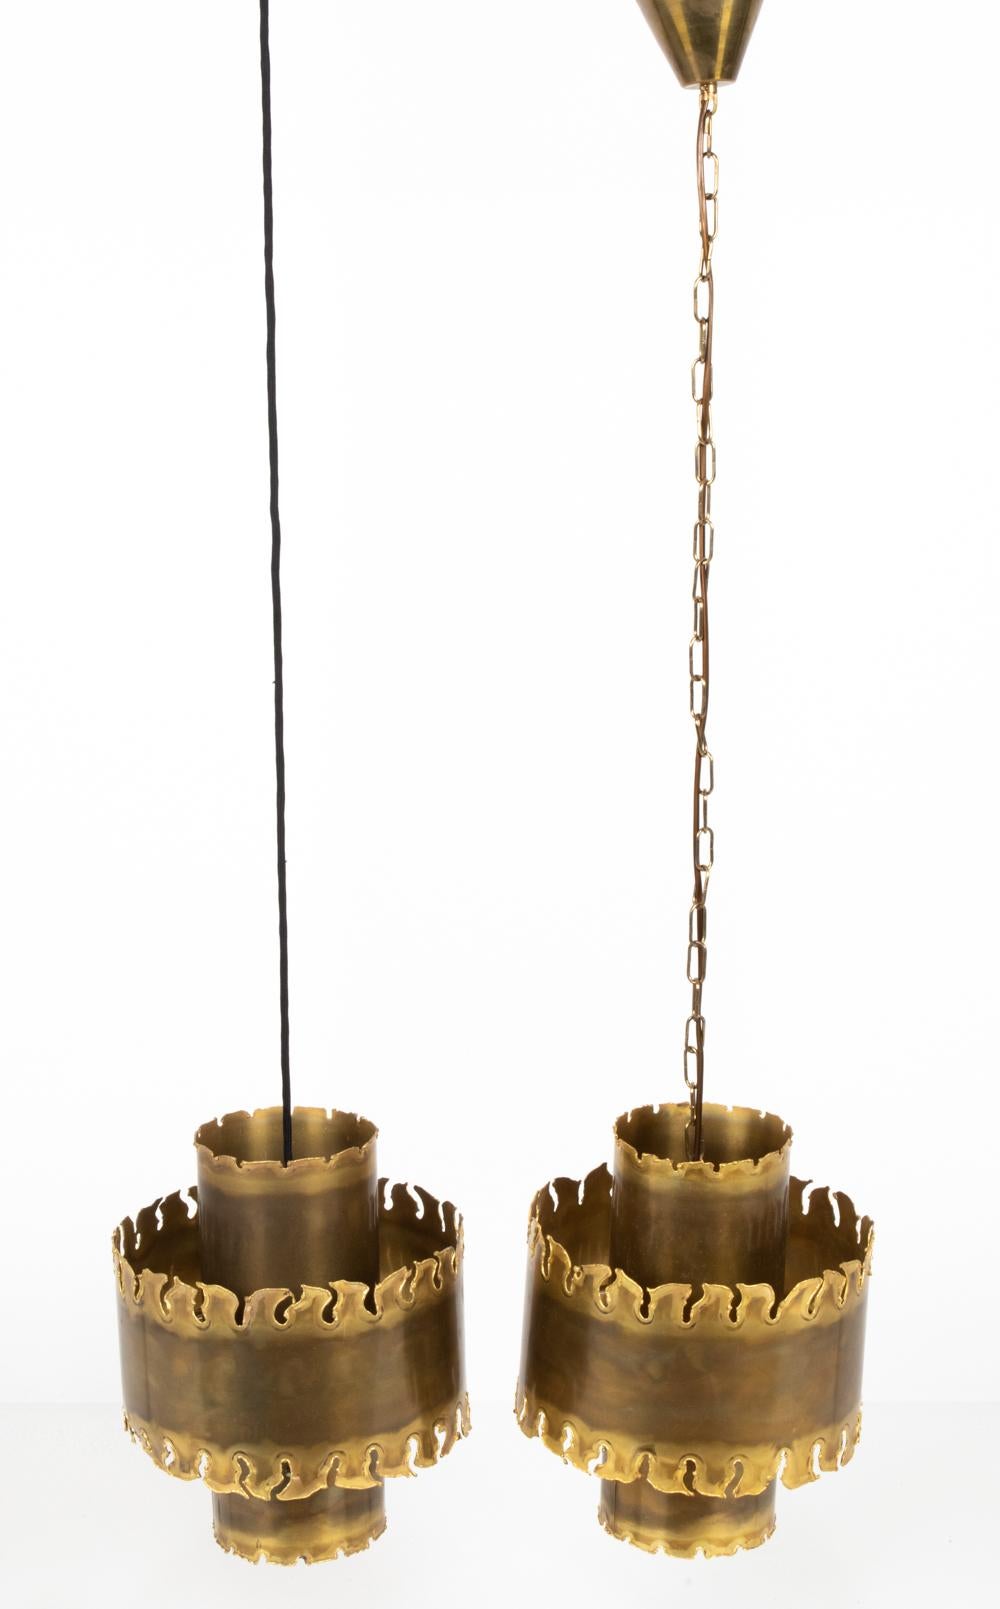 Pair of Brutalist Torch-Cut Brass Pendant Lights by Svend Aage Holm Sørensen In Good Condition For Sale In Norwalk, CT